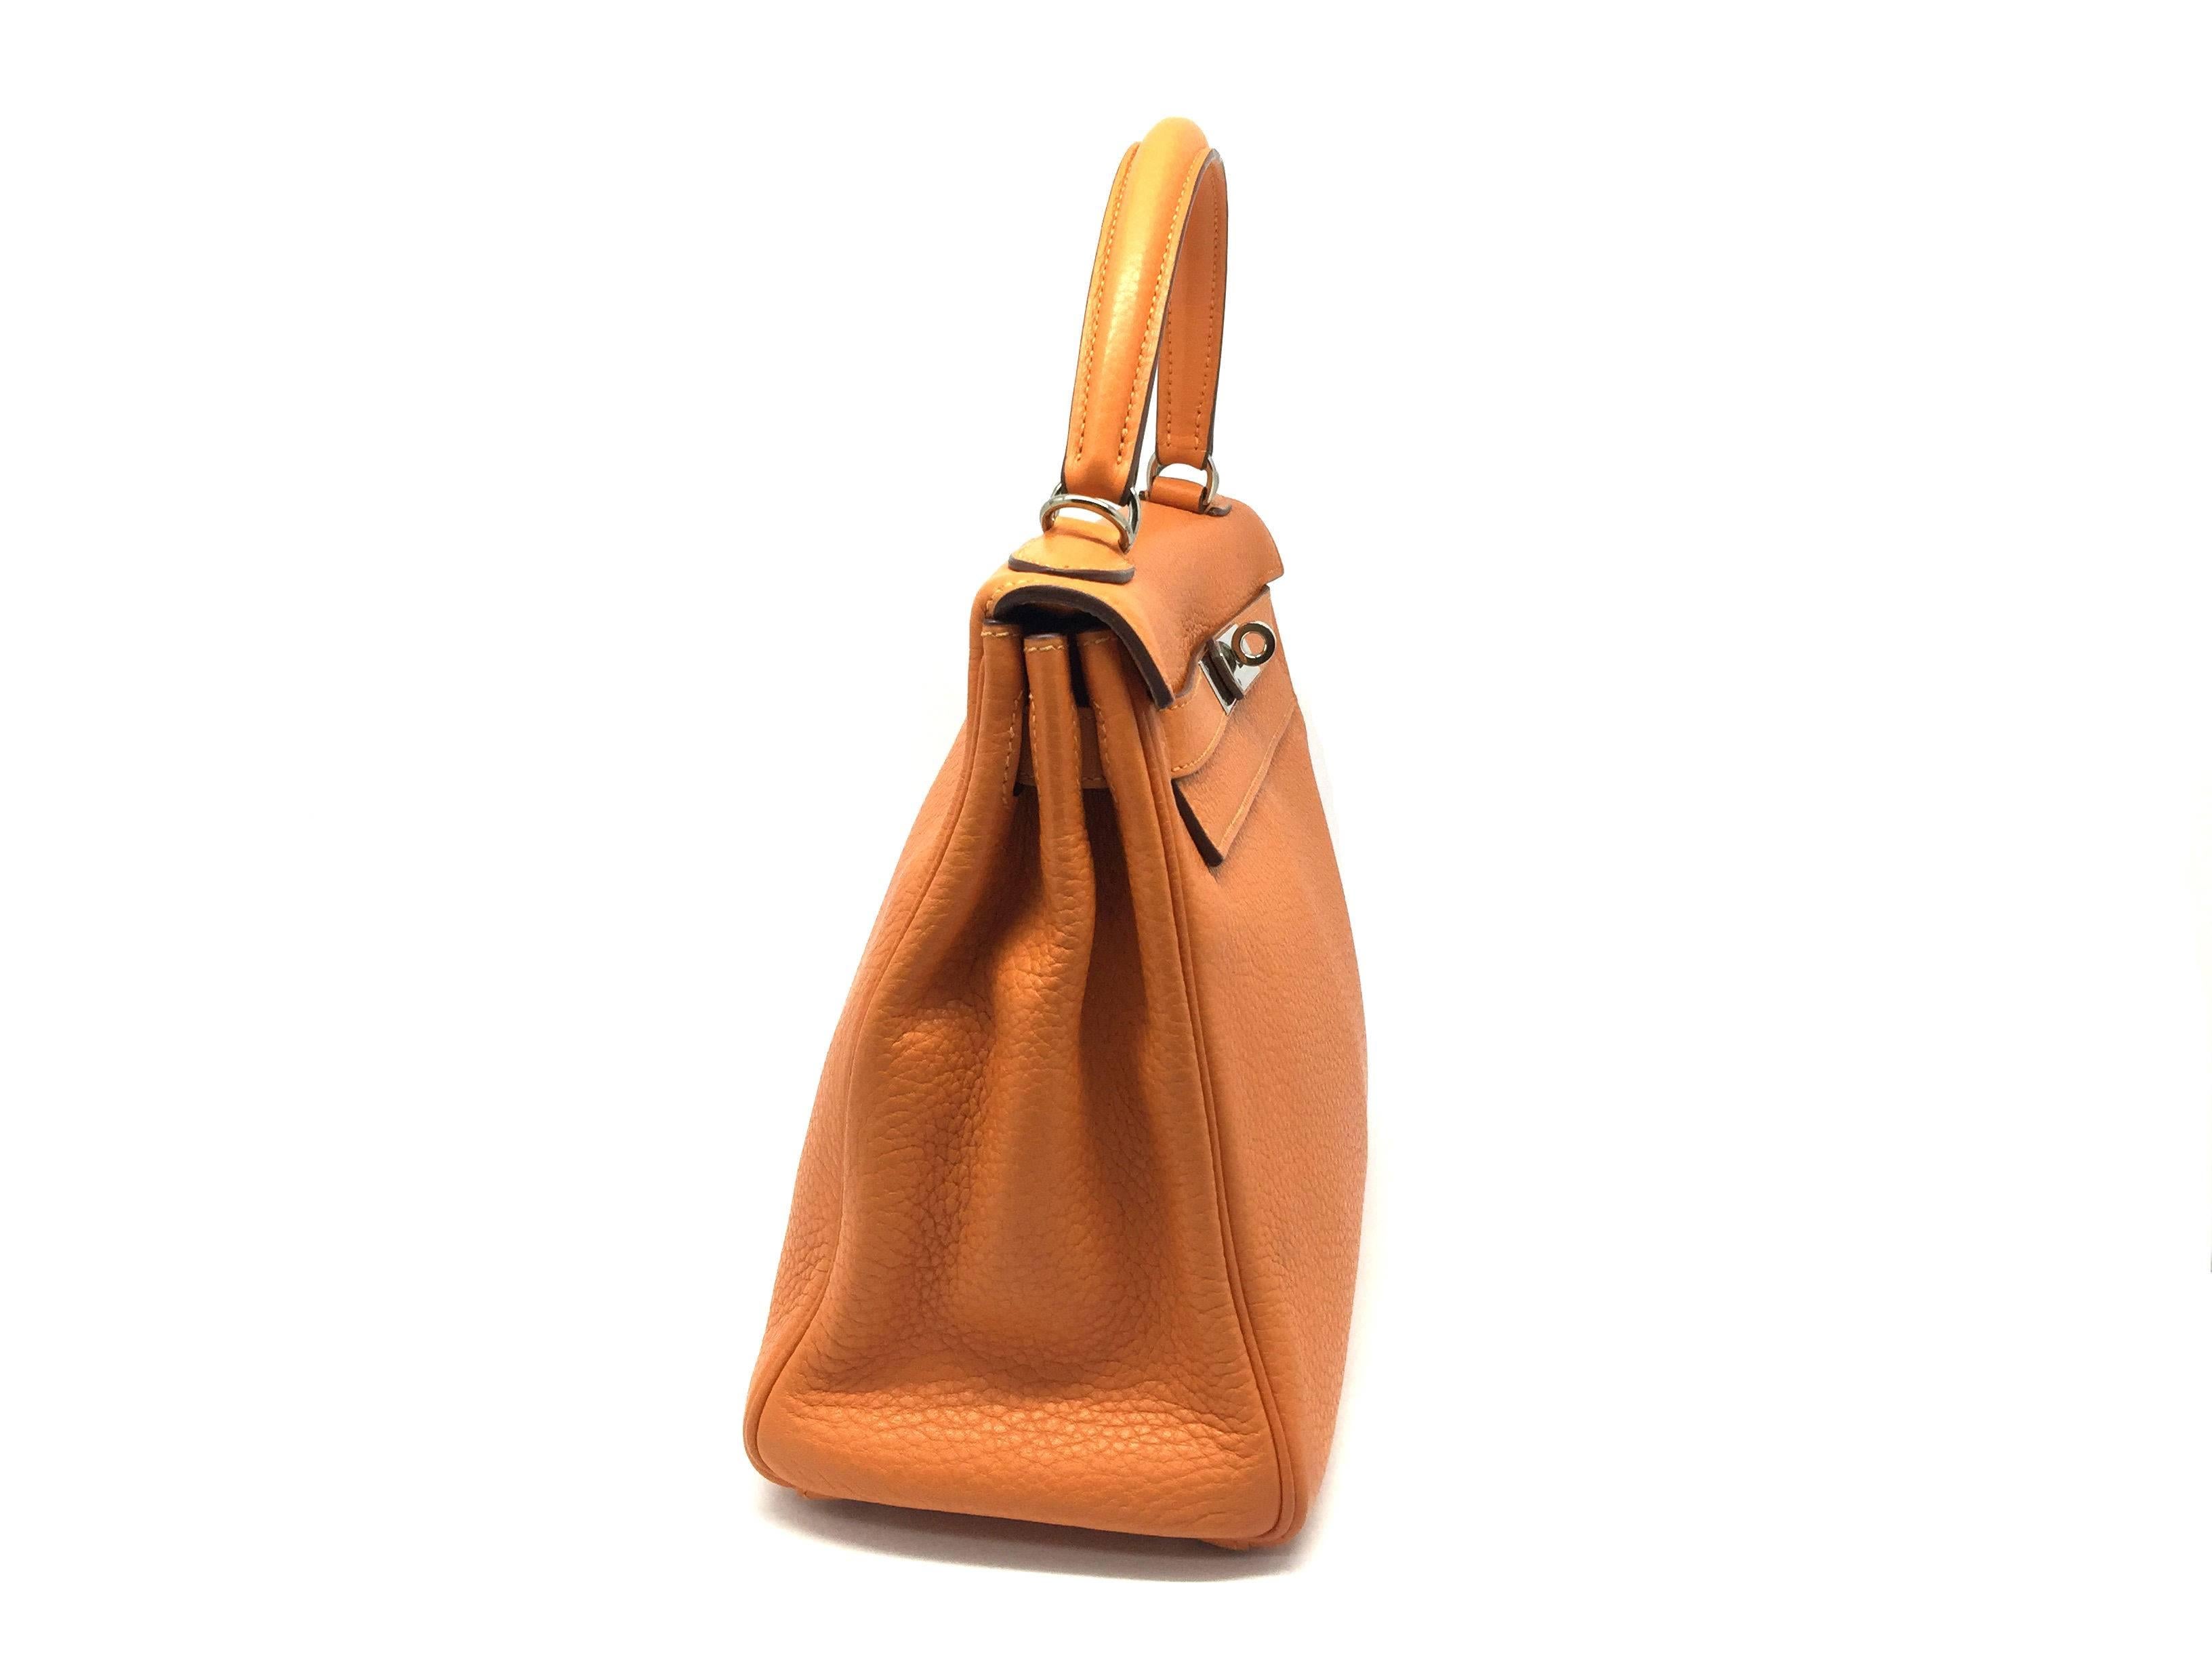 Hermes Kelly 32 Orange Iris Clemence Leather SHW Top Handle Bag In Excellent Condition For Sale In Kowloon, HK